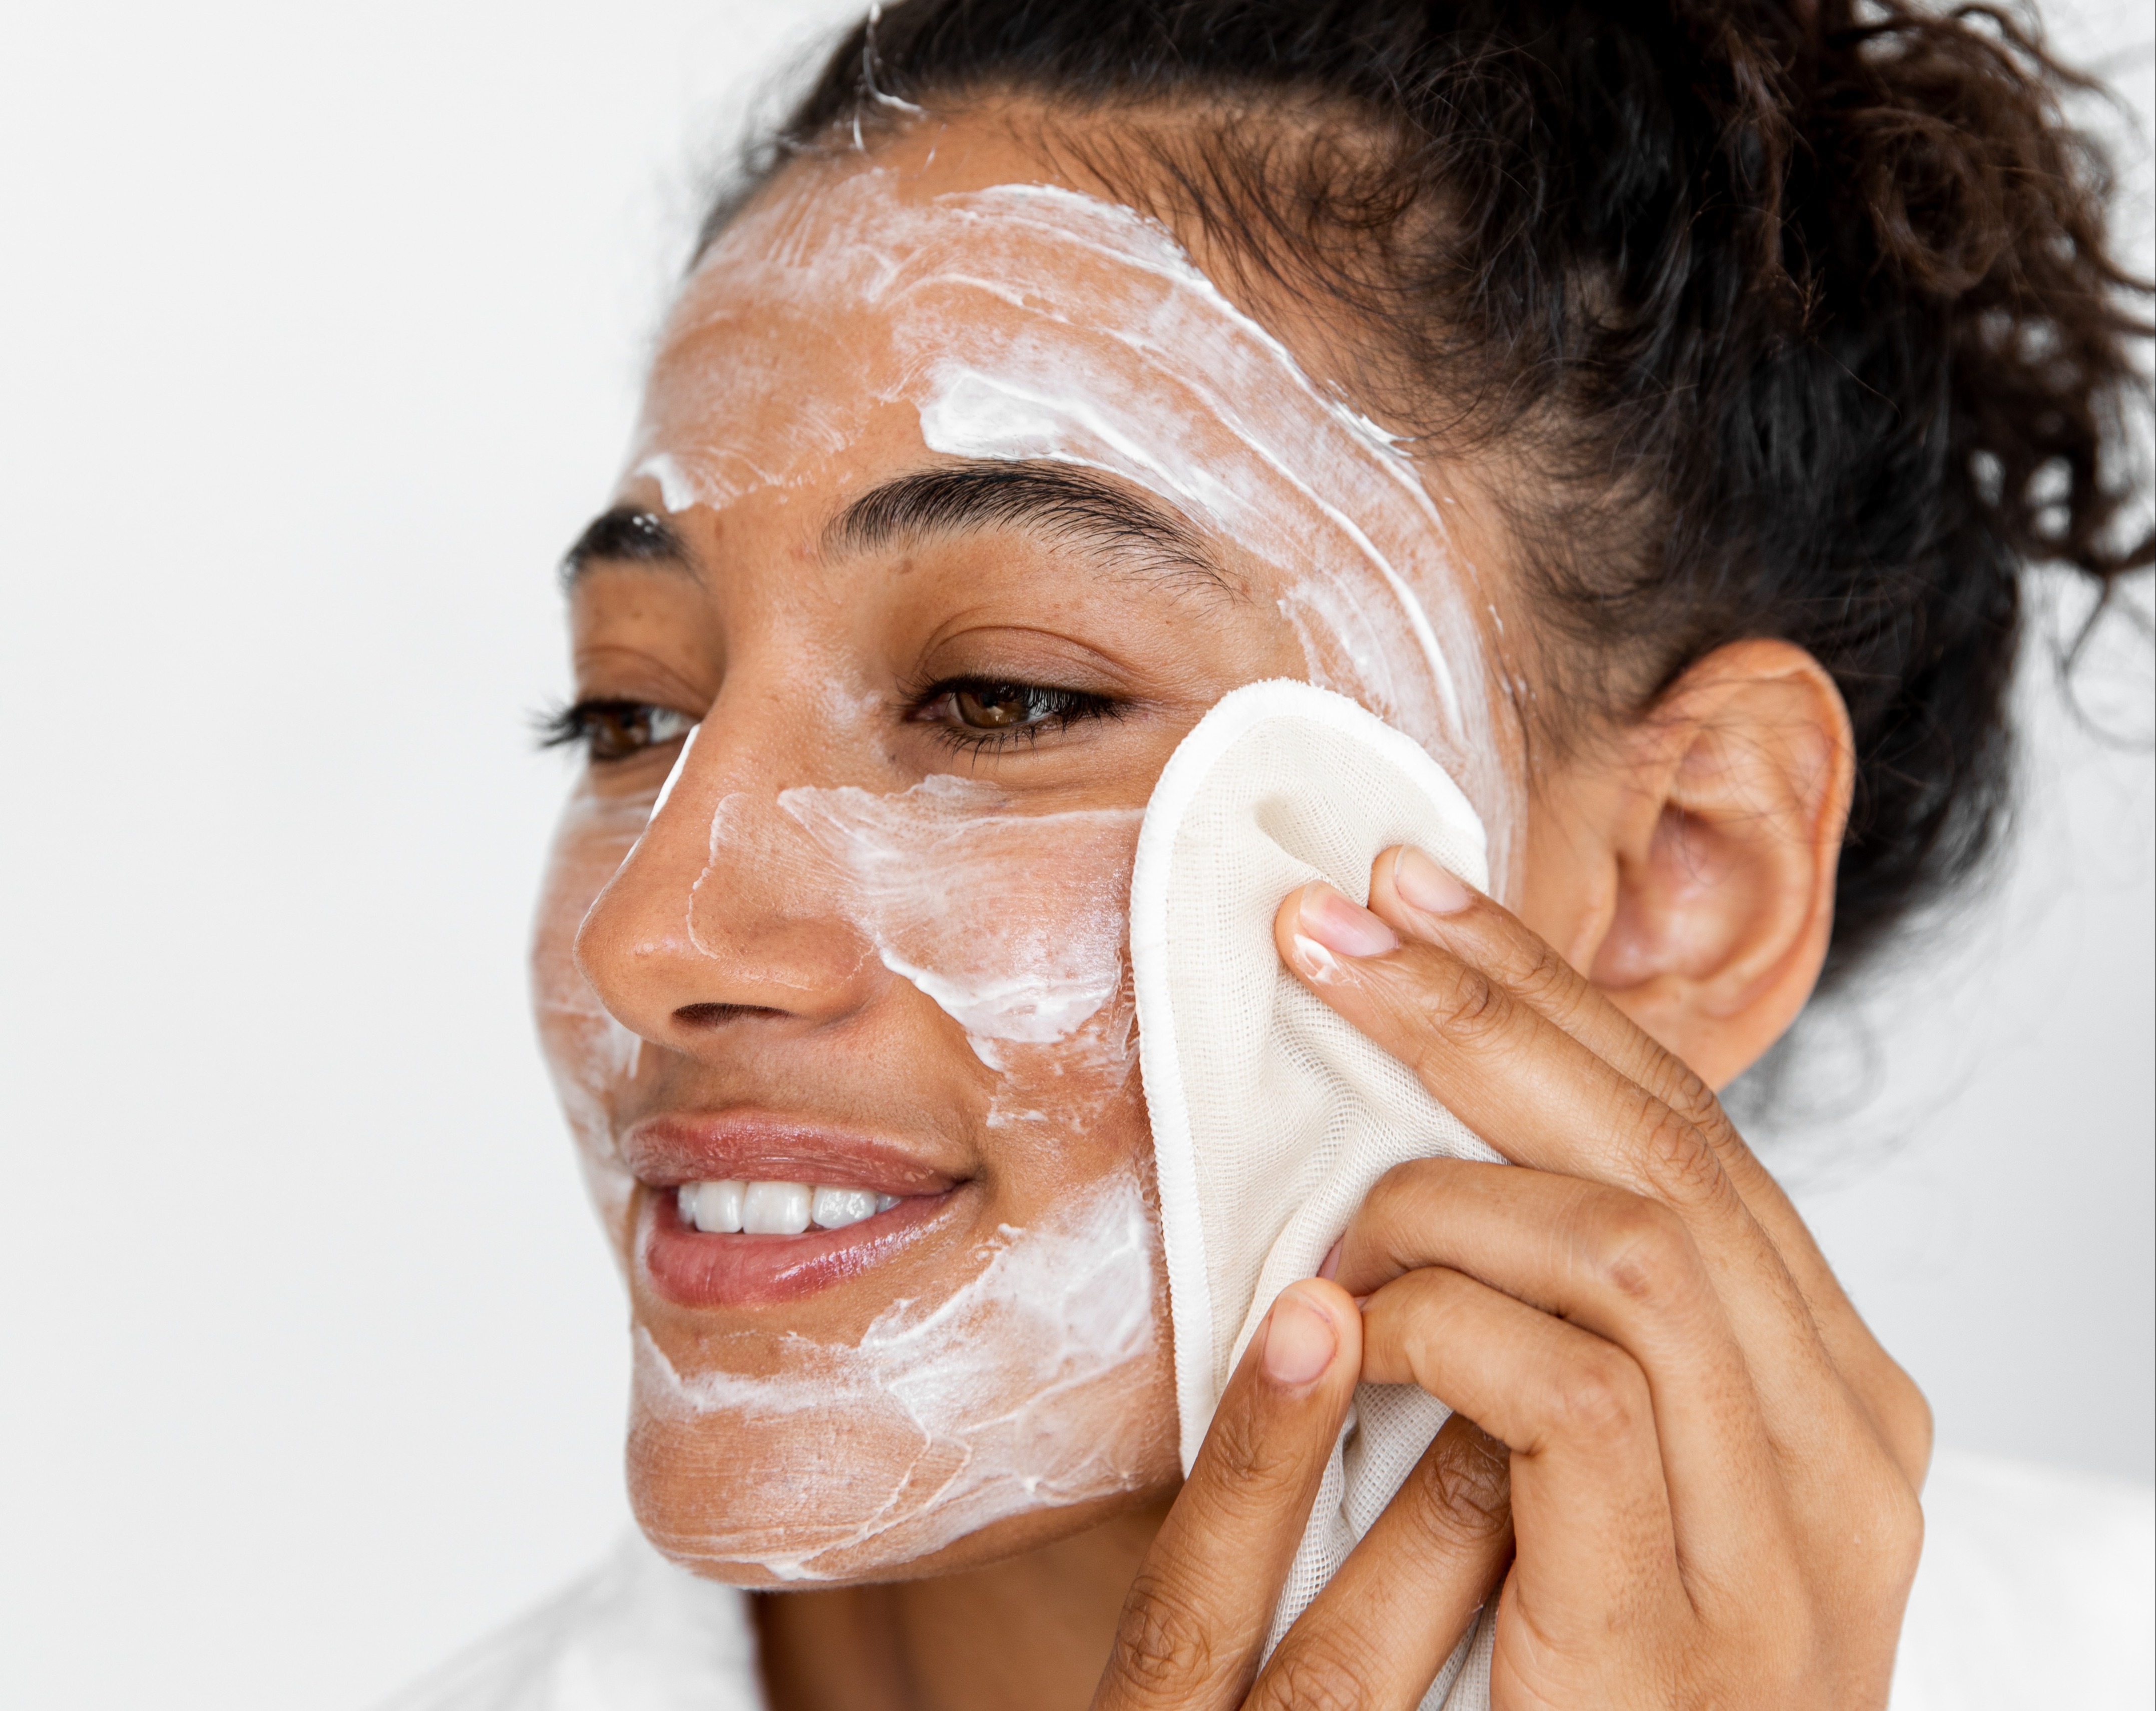 How To Choose A Cleanser Based On Your Skin Type